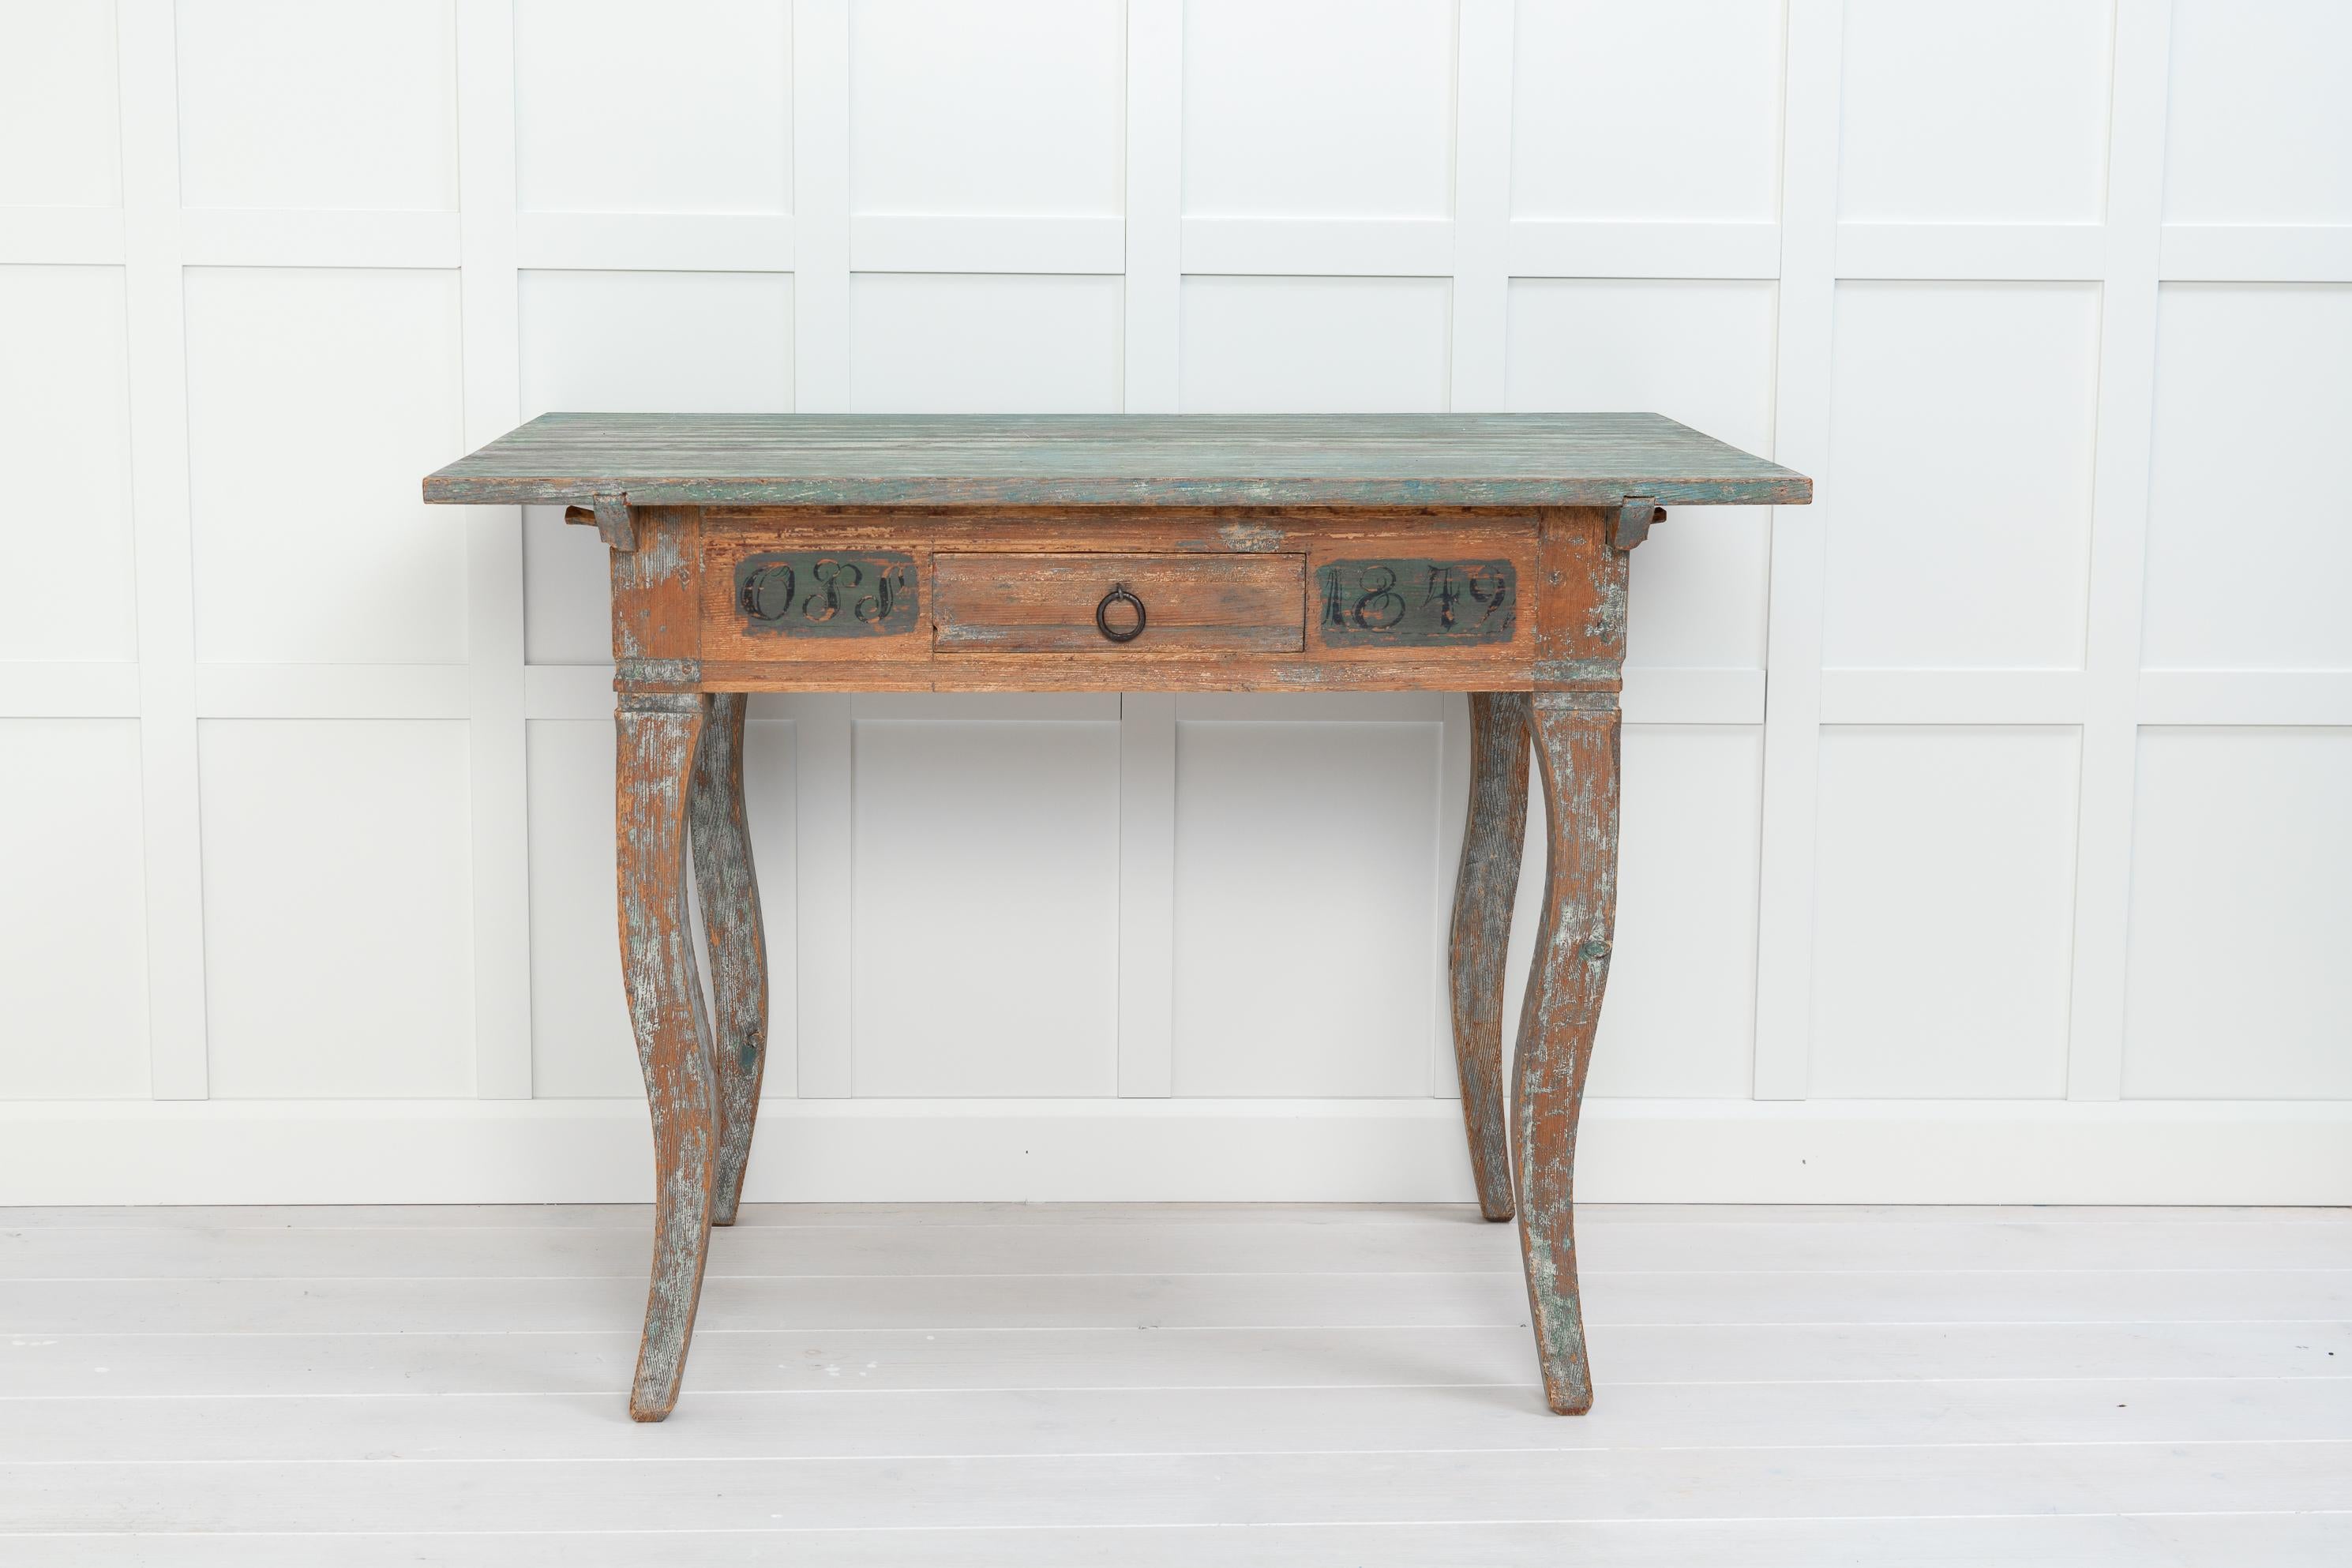 Antique Swedish handmade table in rococo style. The table is a country furniture with neat proportions and gently curved legs. The table is rococo which is explained by the fact that the furniture styles lived on in the countryside far longer than